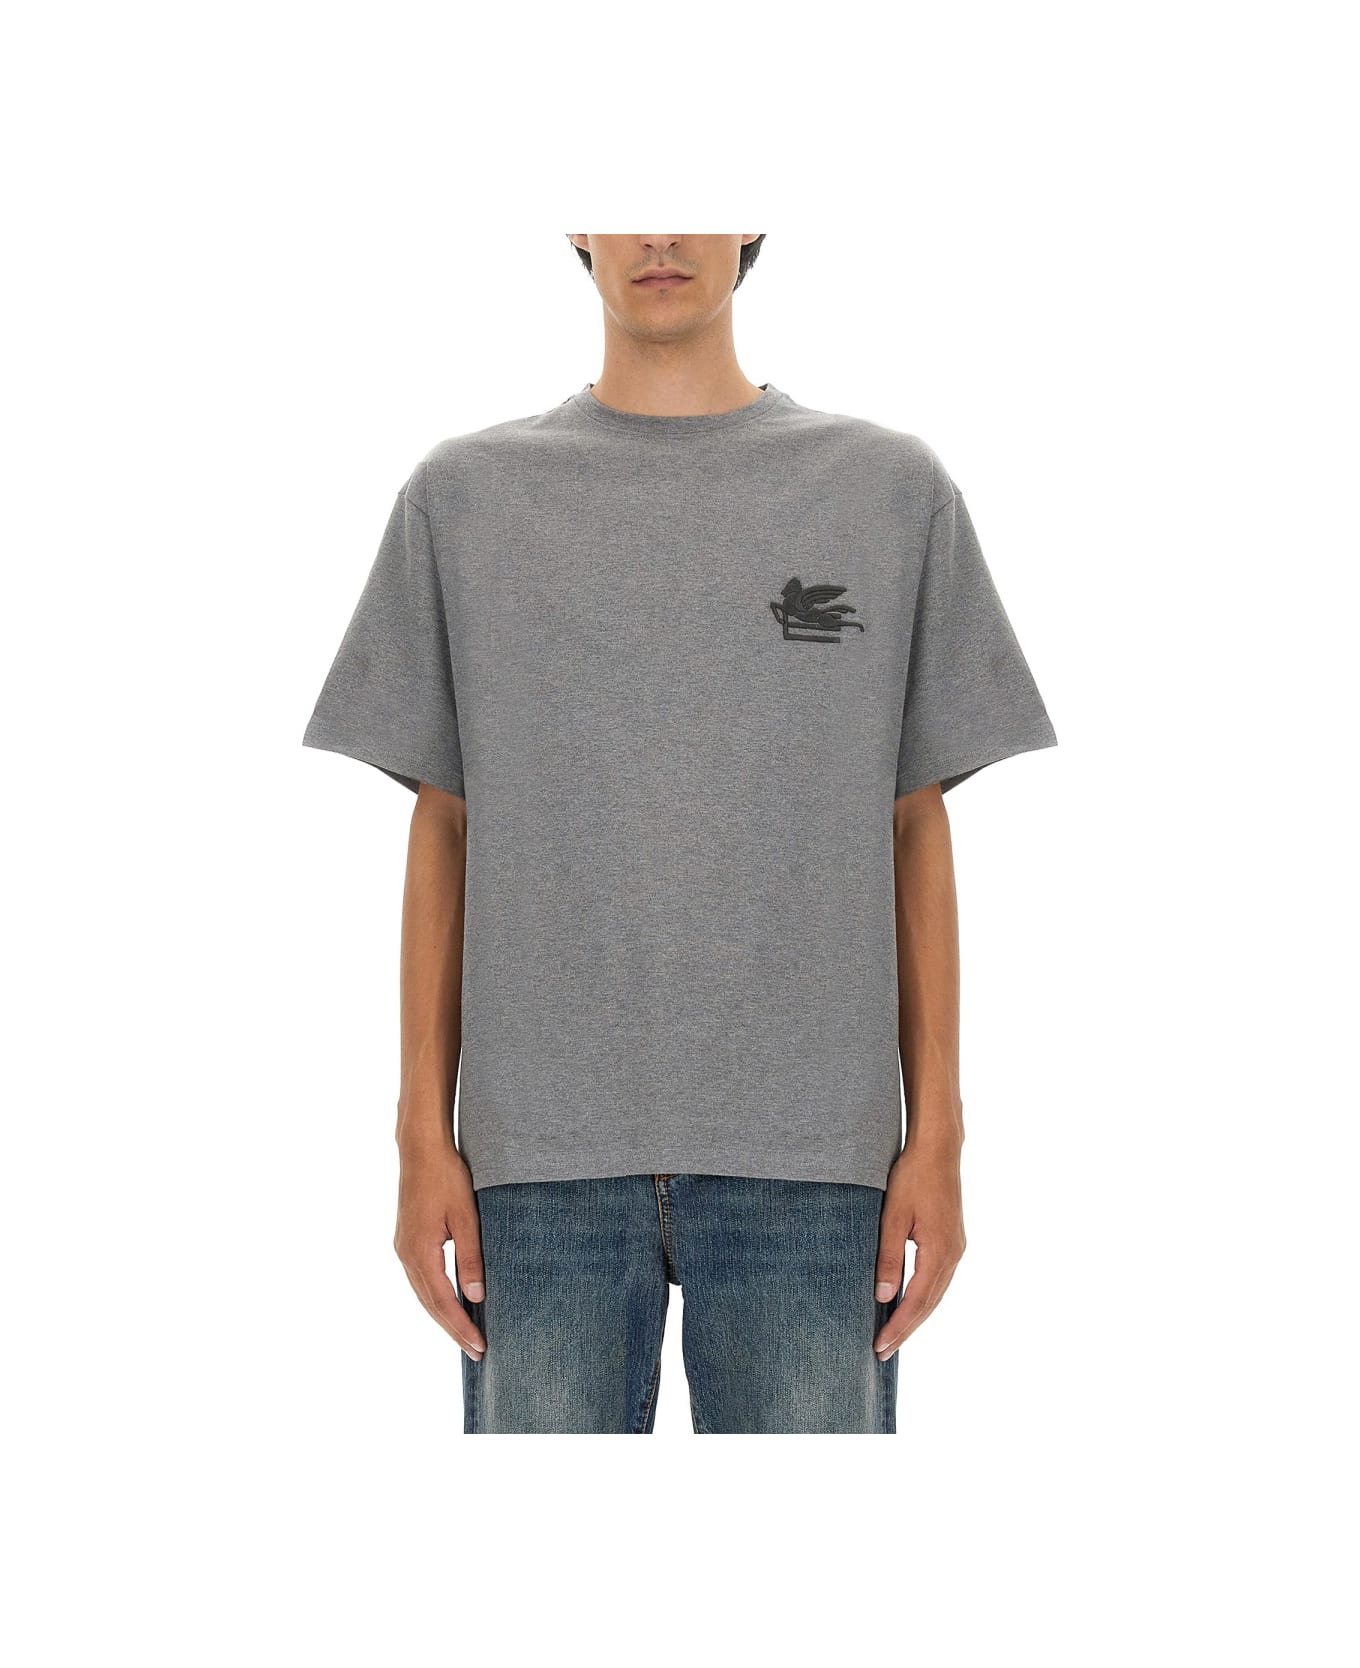 Etro T-shirt With Pegasus Embroidery - GREY シャツ